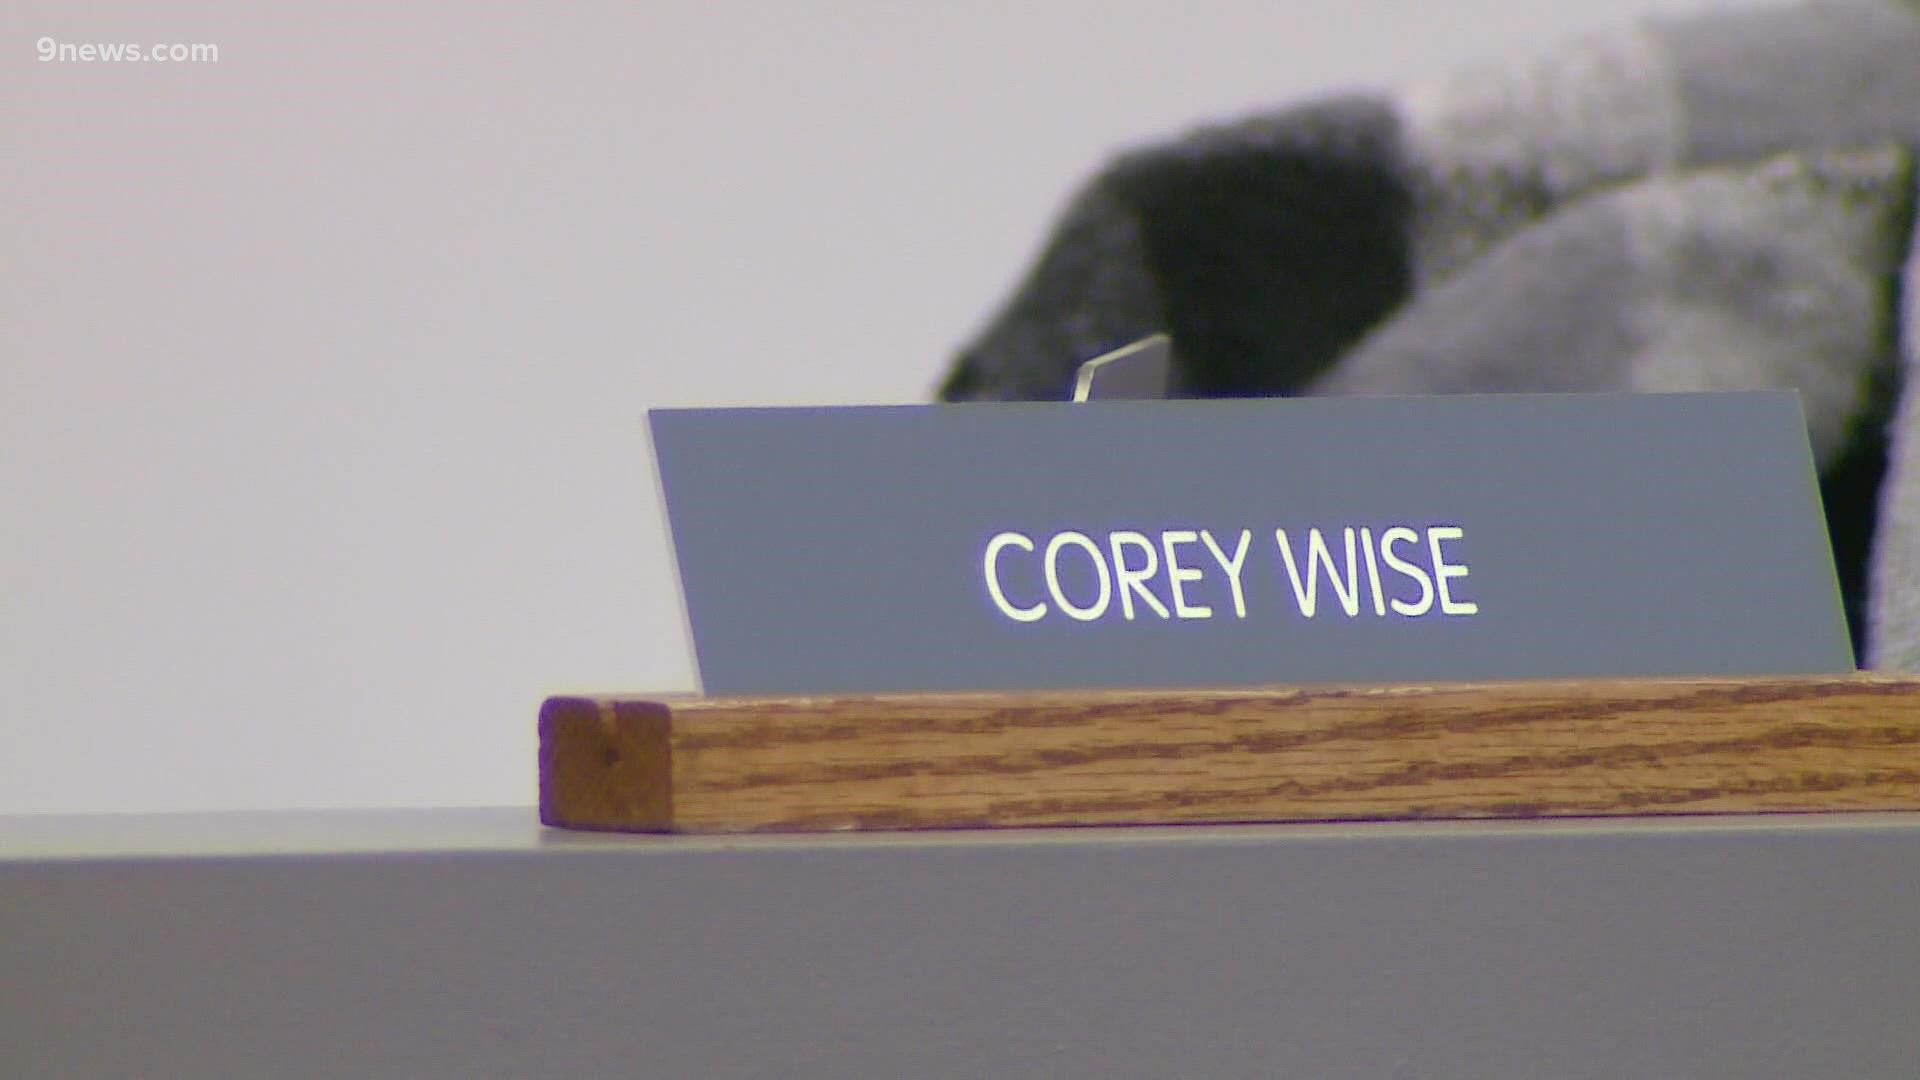 Dougco paid a quarter million dollars to fire Corey Wise without cause, though the board president suggested on talk radio Wise did something worthy of termination.